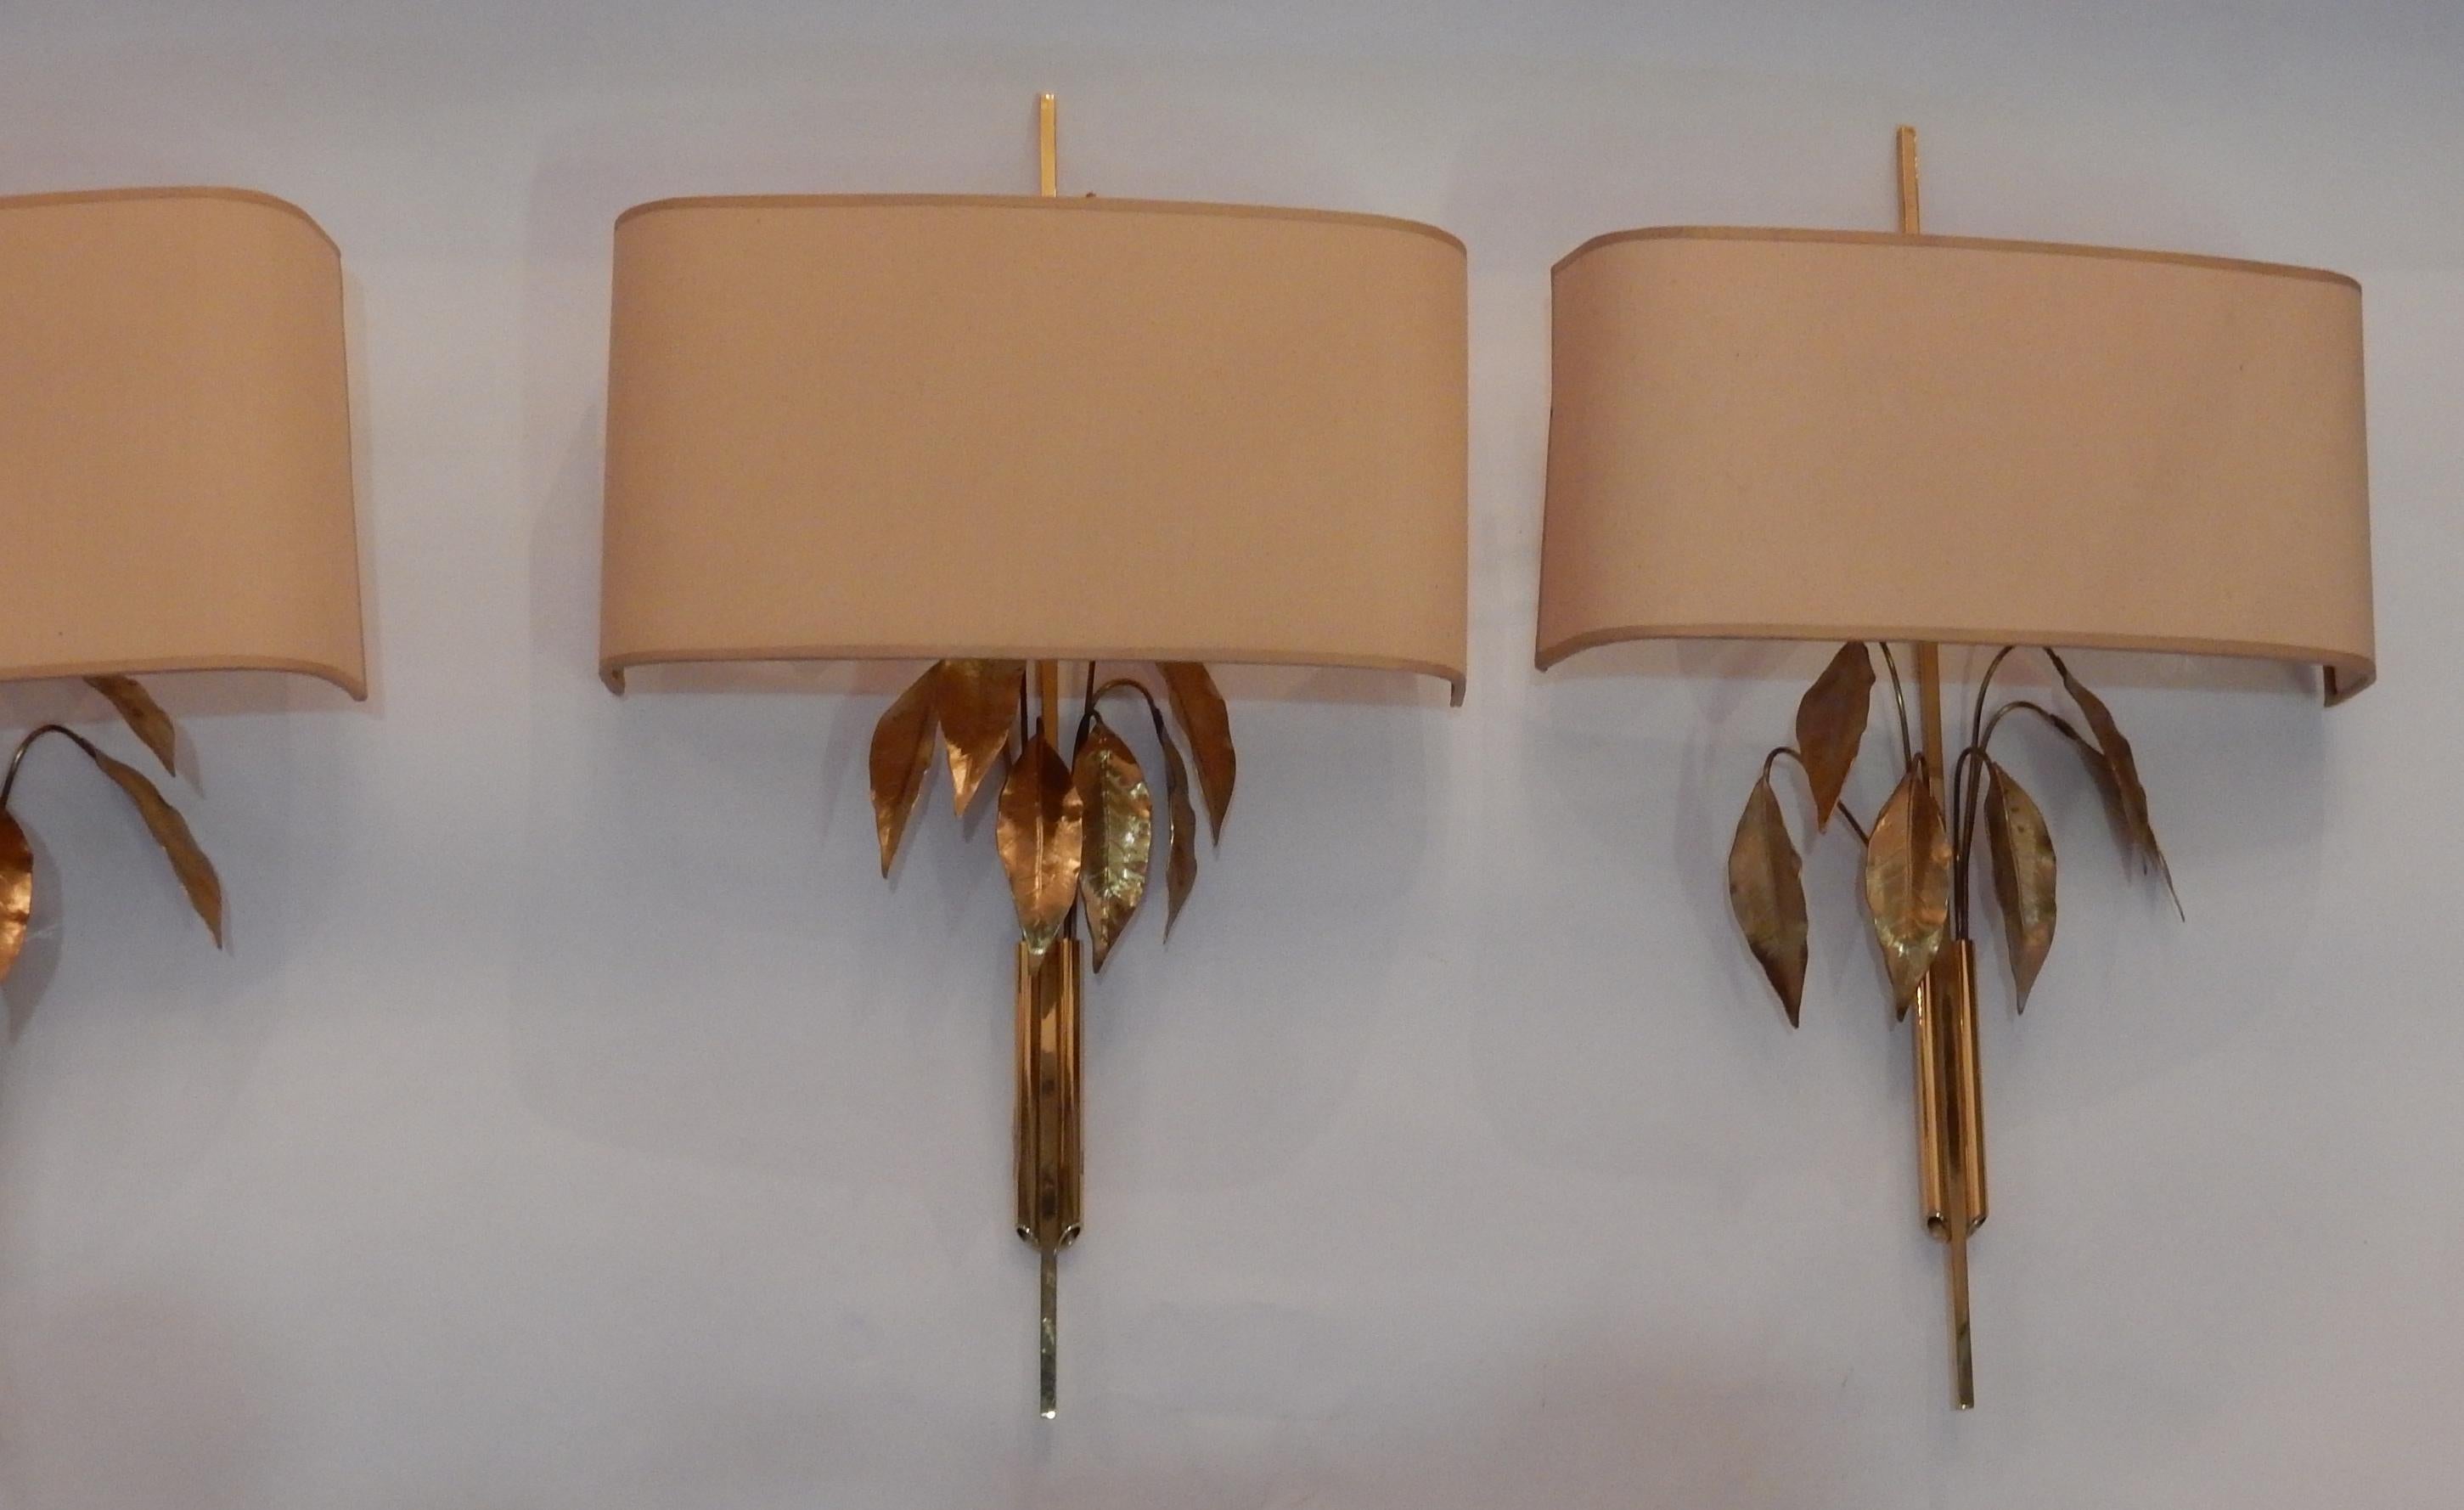 4 wall lamps in gilded brass, lampshades origin, good condition, circa 1970-1980.